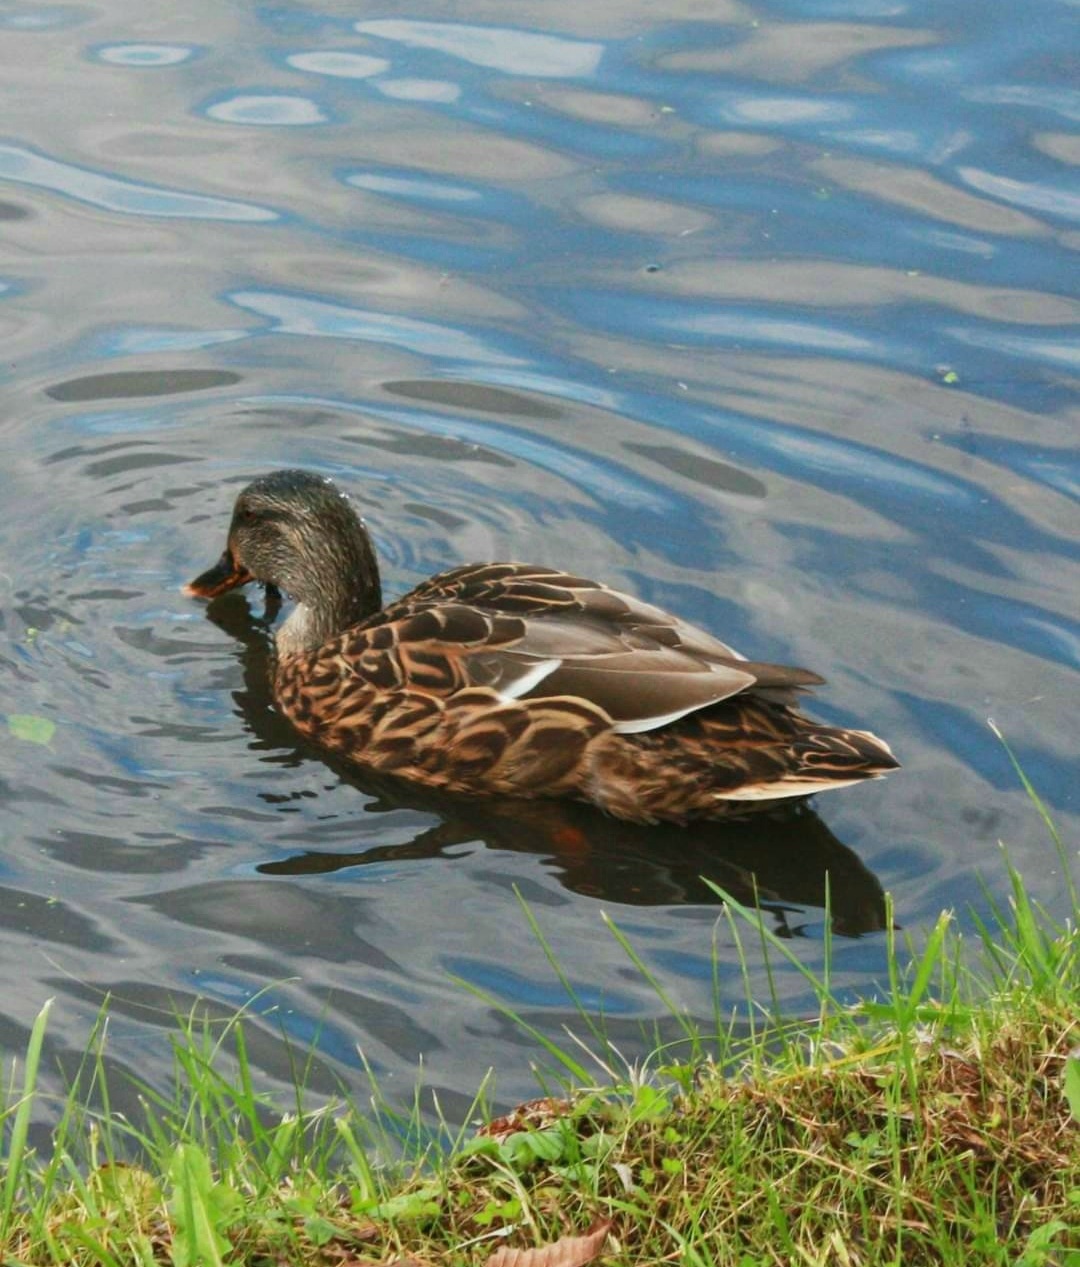 A photo of a brown duck in a blue pond.